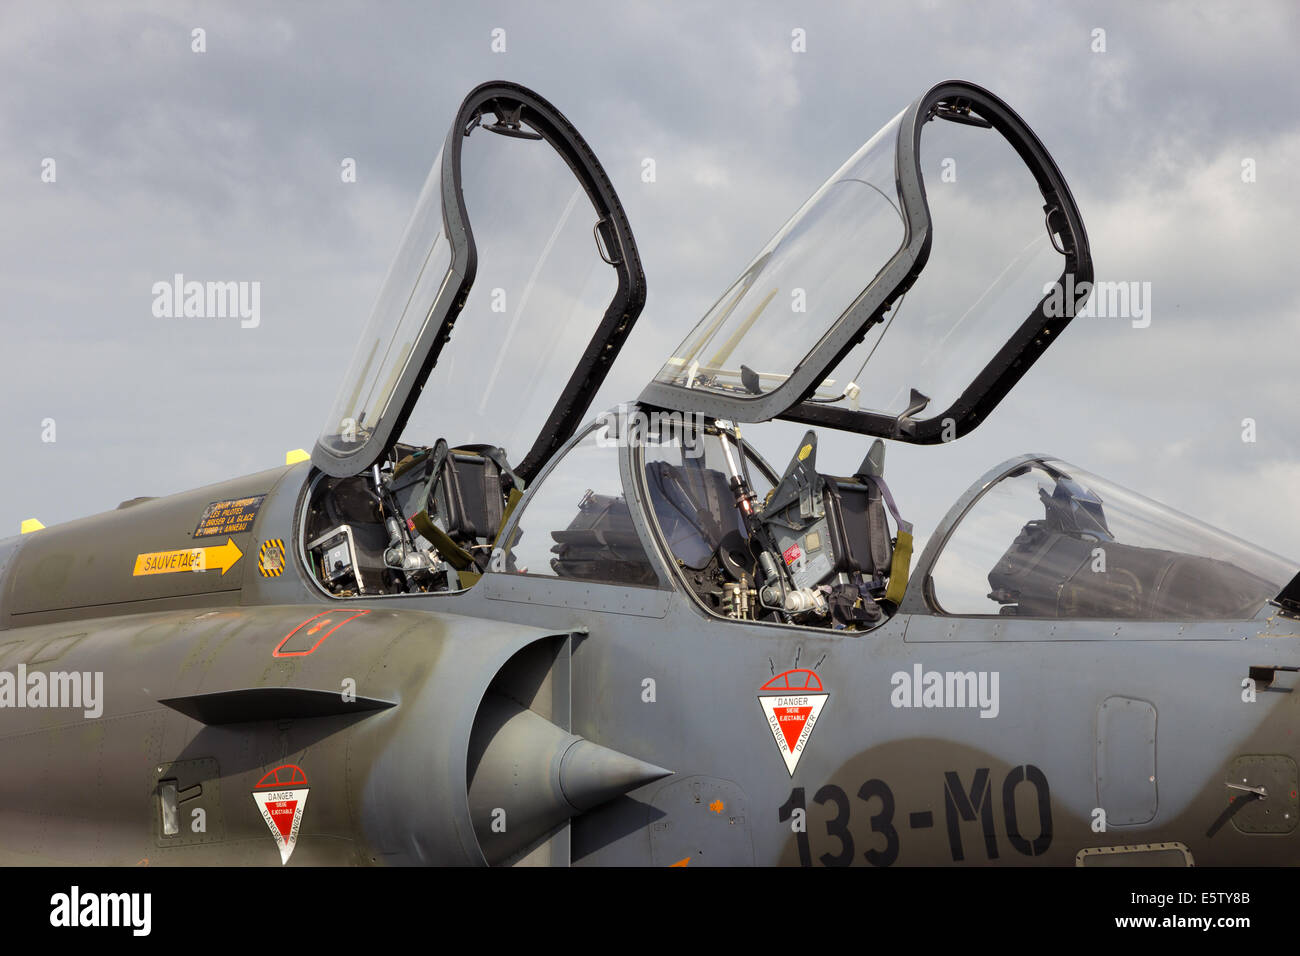 French Air Force Mirage 2000 cockpit Banque D'Images